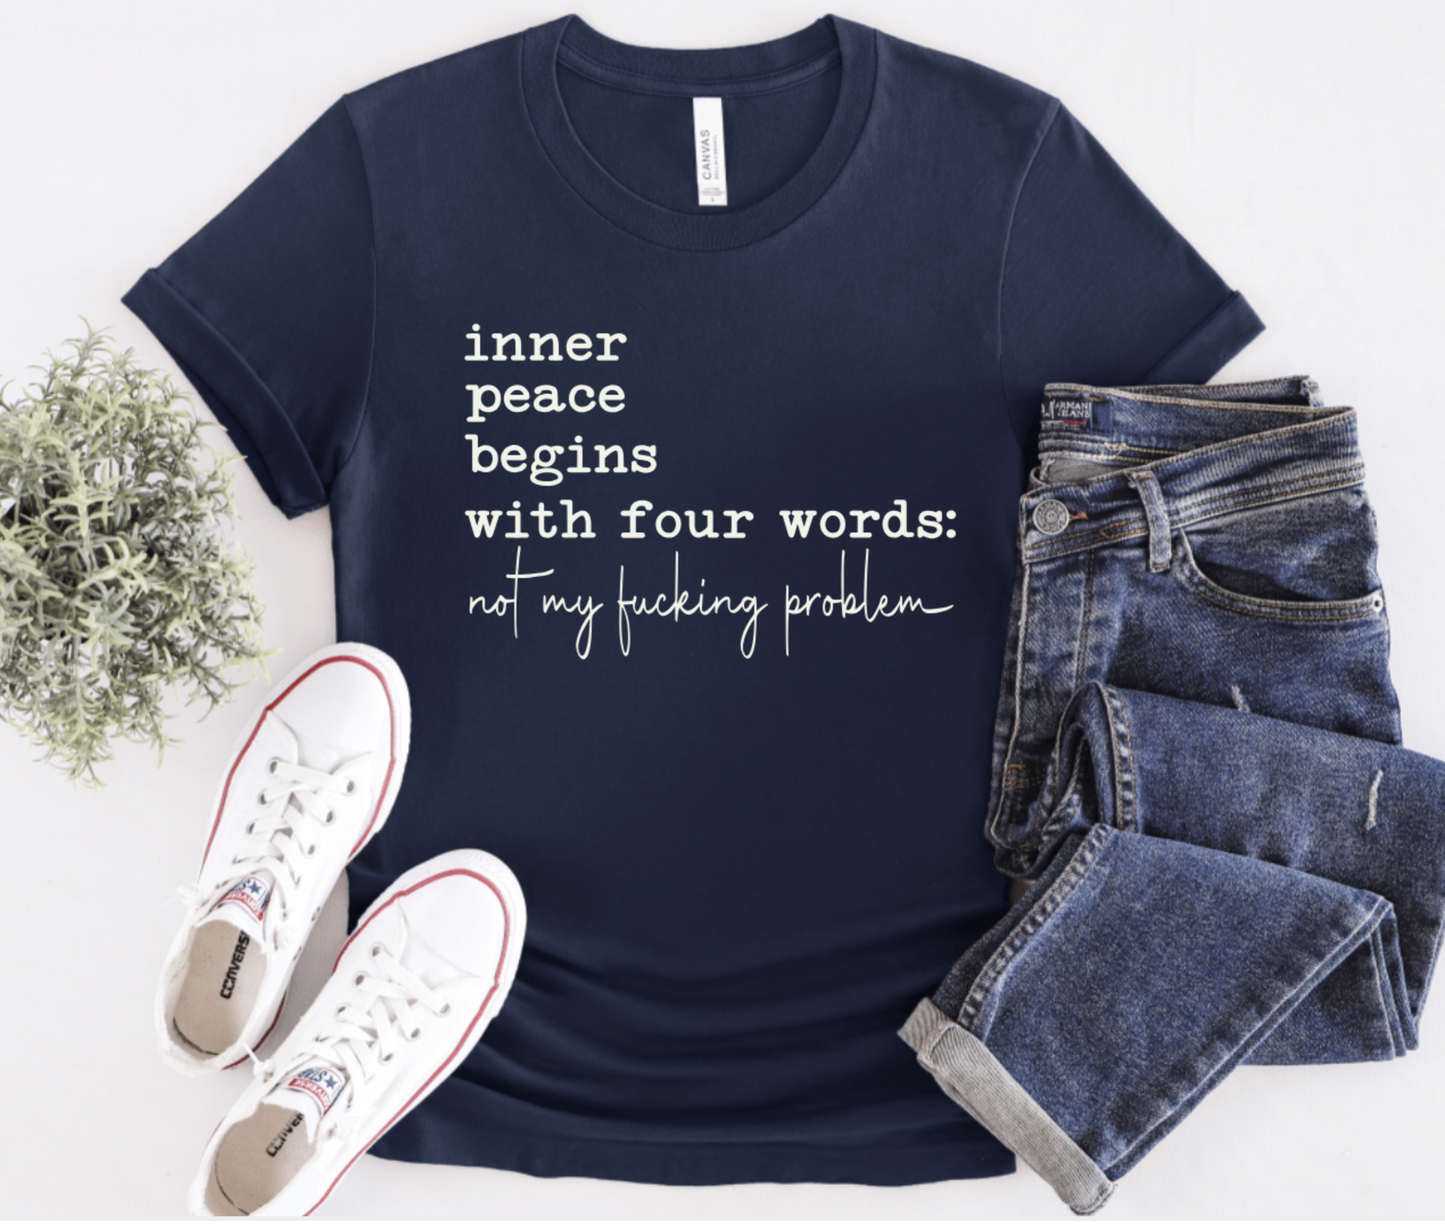 INNER PEACE BEGINS WITH FOUR WORDS